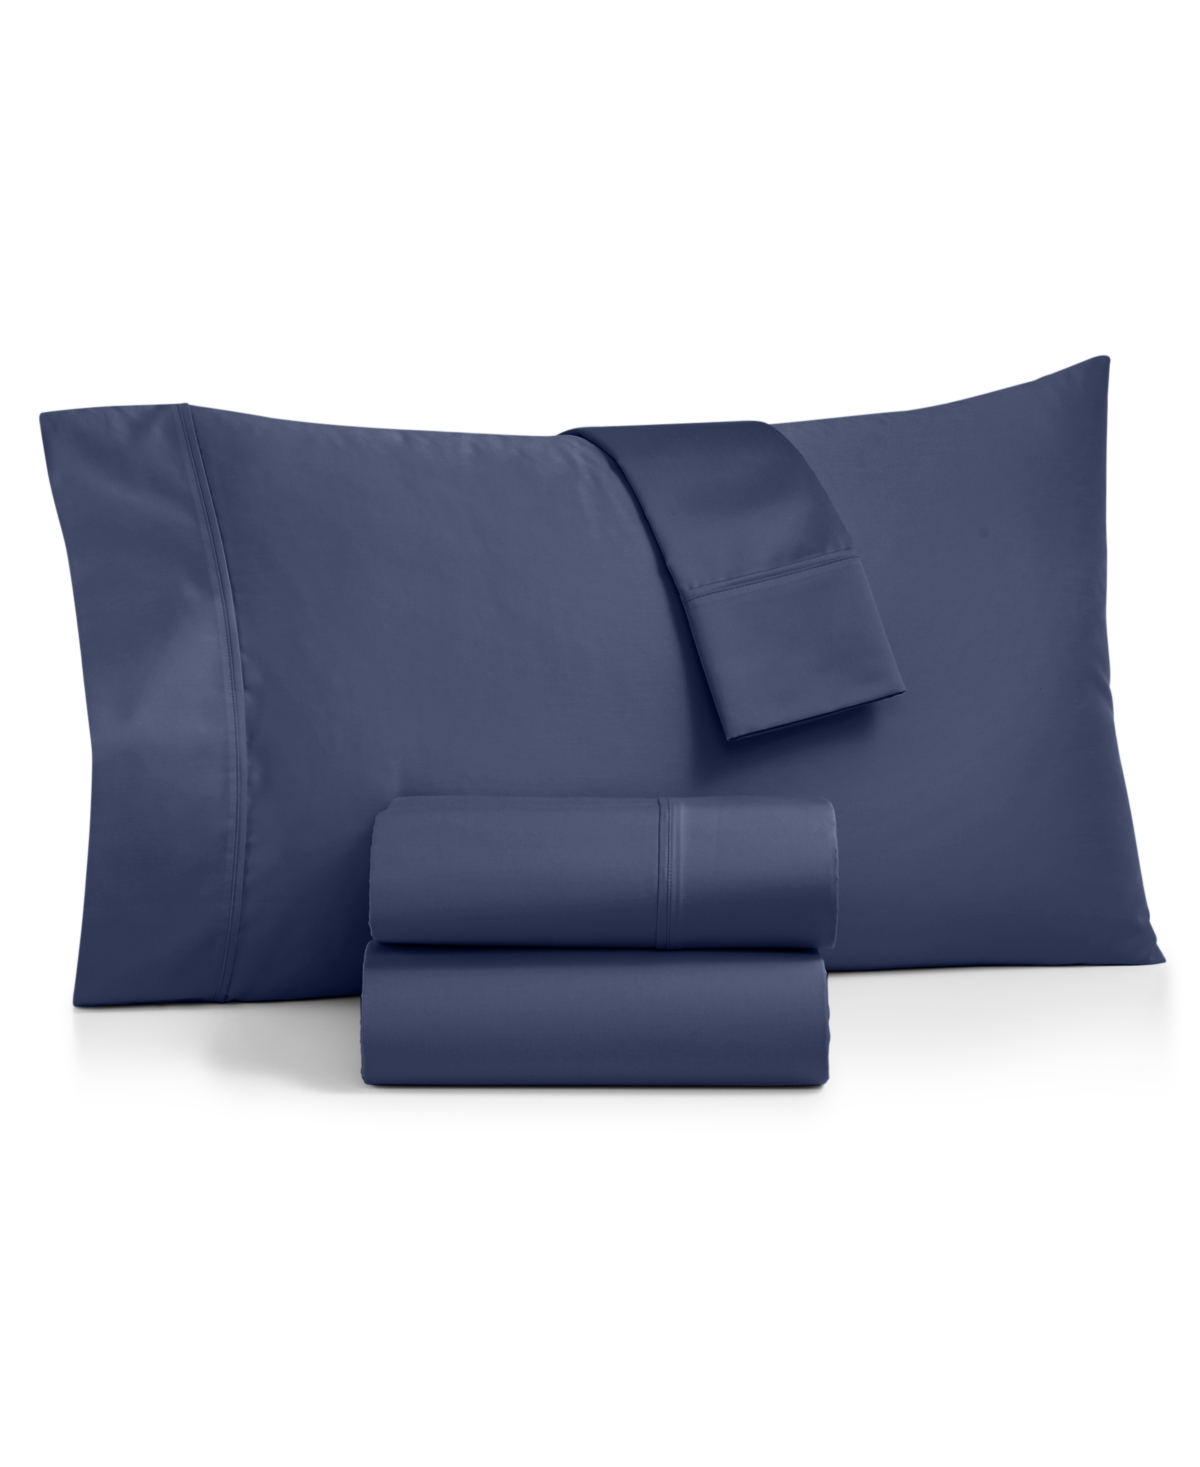 Charter Club Sleep Luxe 700 Thread Count 100% Egyptian Cotton Pillowcase Pair, King, Created For Macy's In Washed Indigo